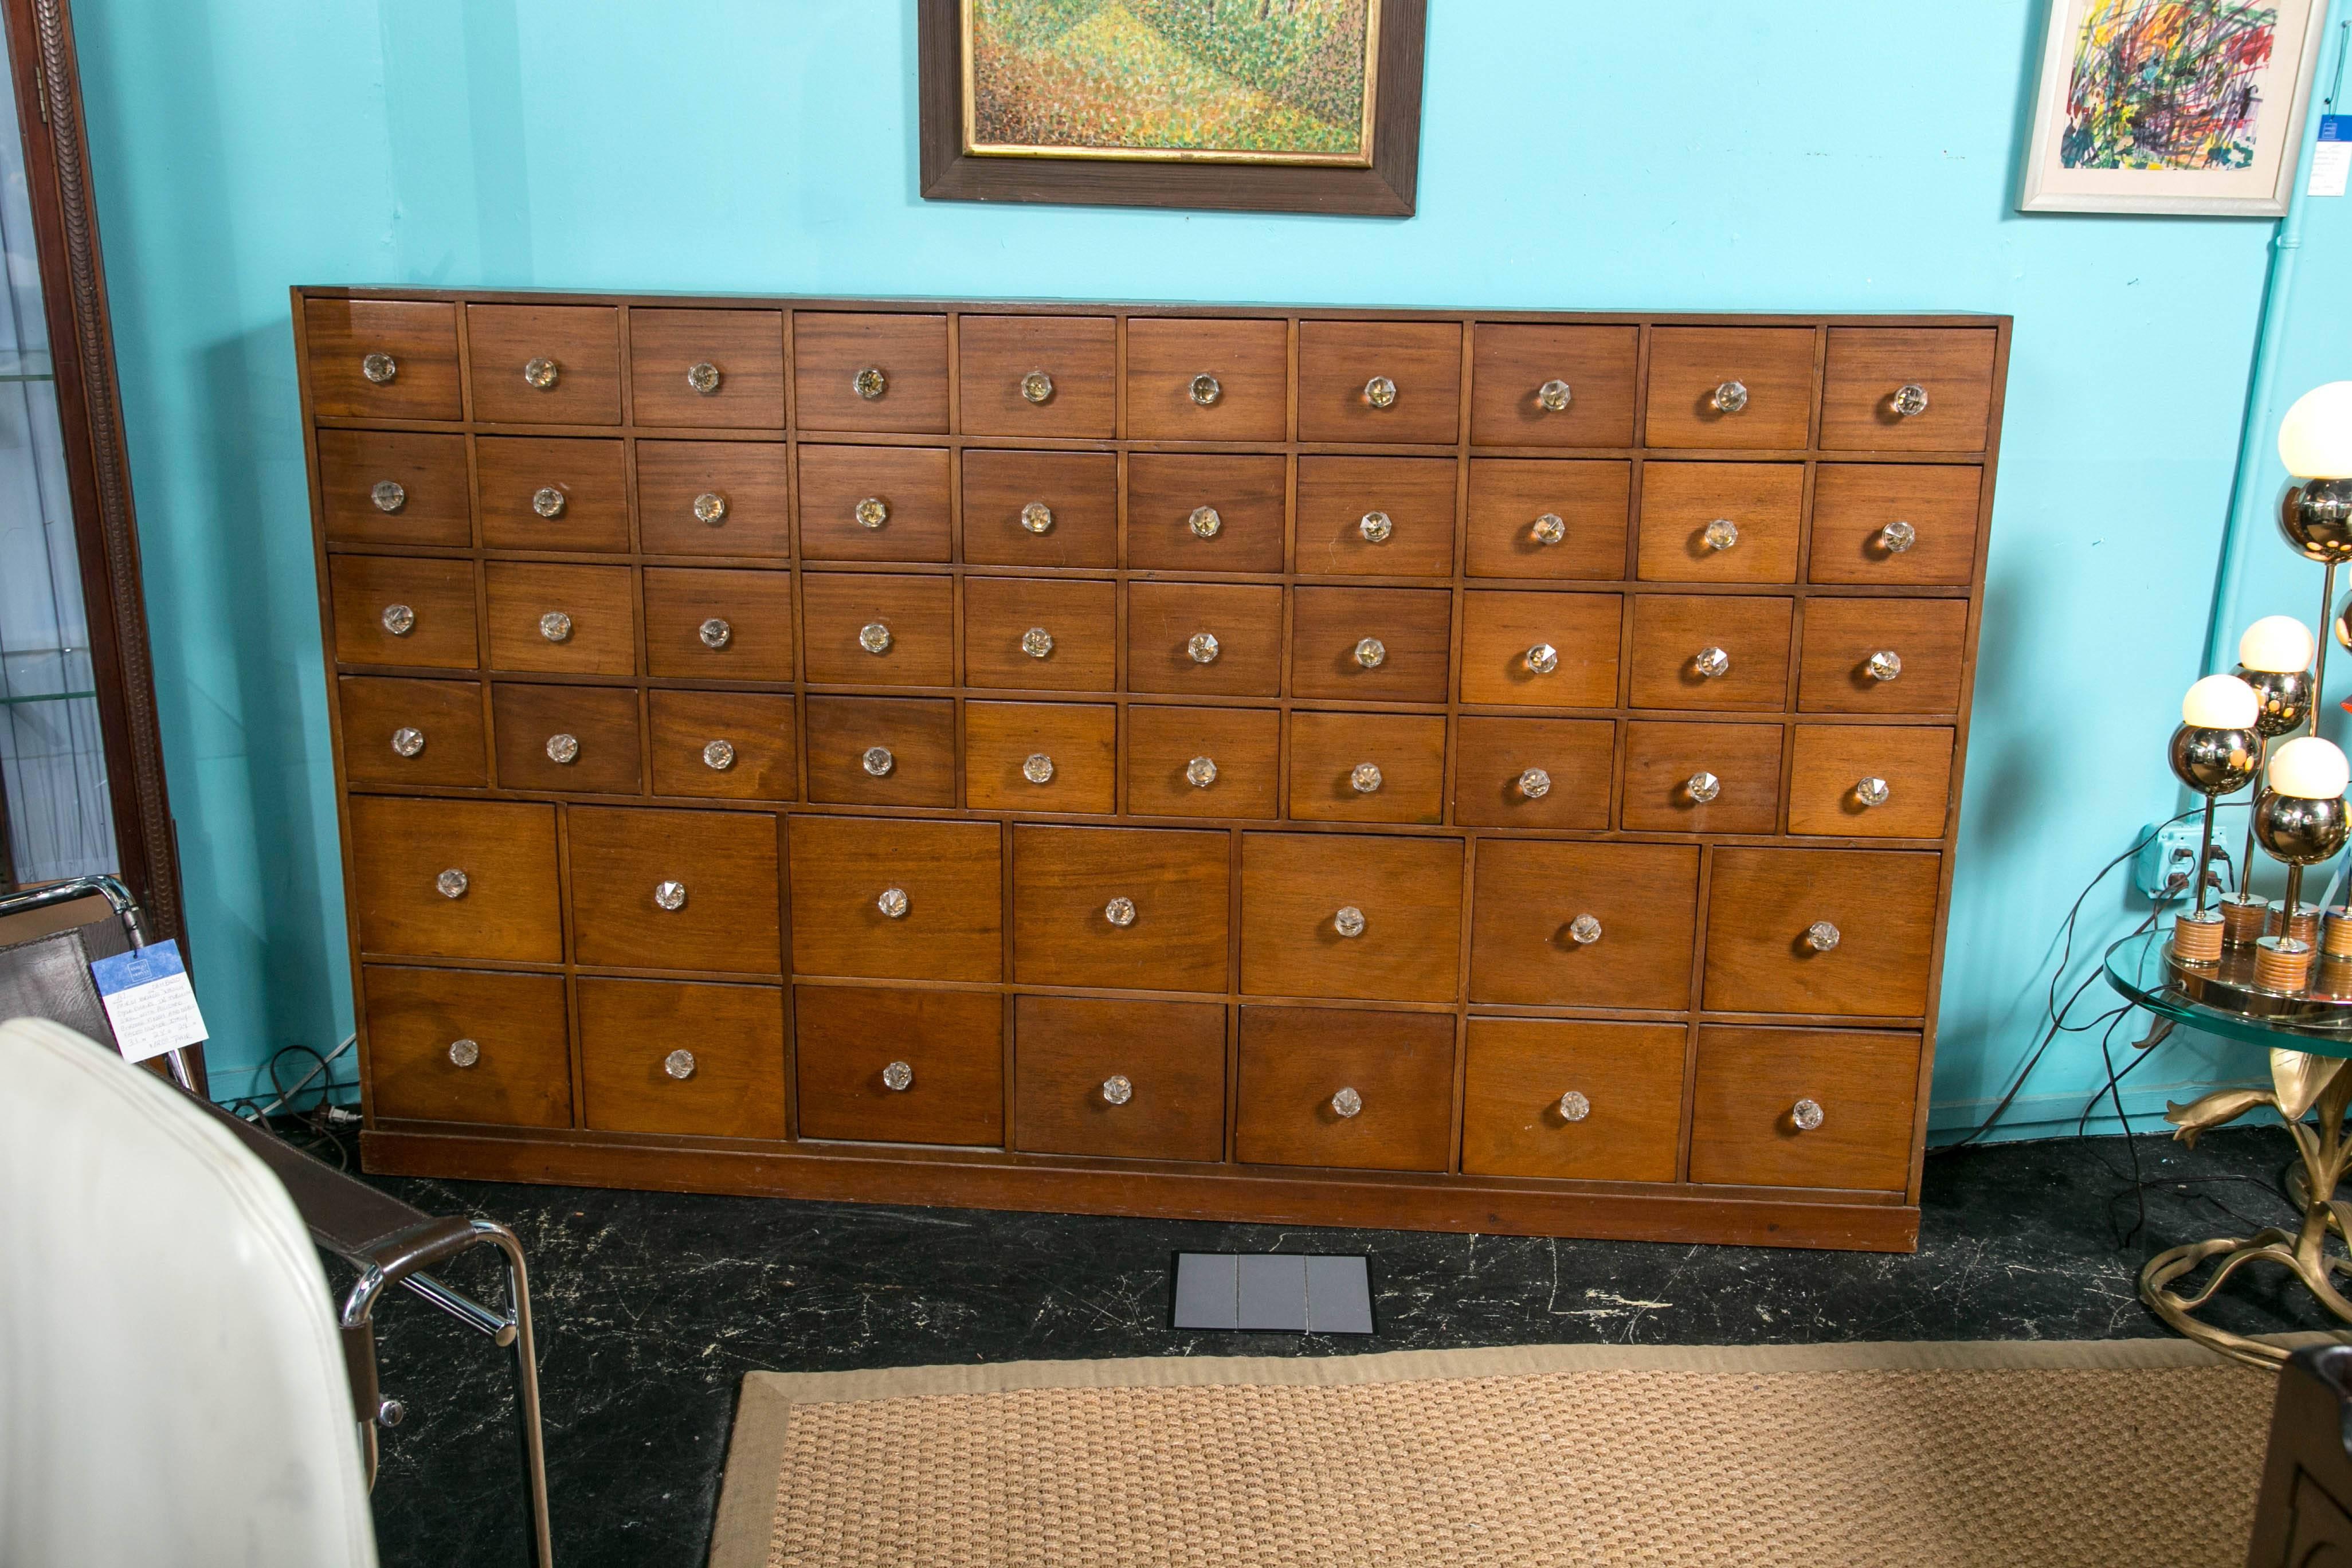 A mahogany, 19th century apothecary chest with 54 drawers, graduated from small to large. Original glass pulls, made by Johnson M.P.S. Prestwich.